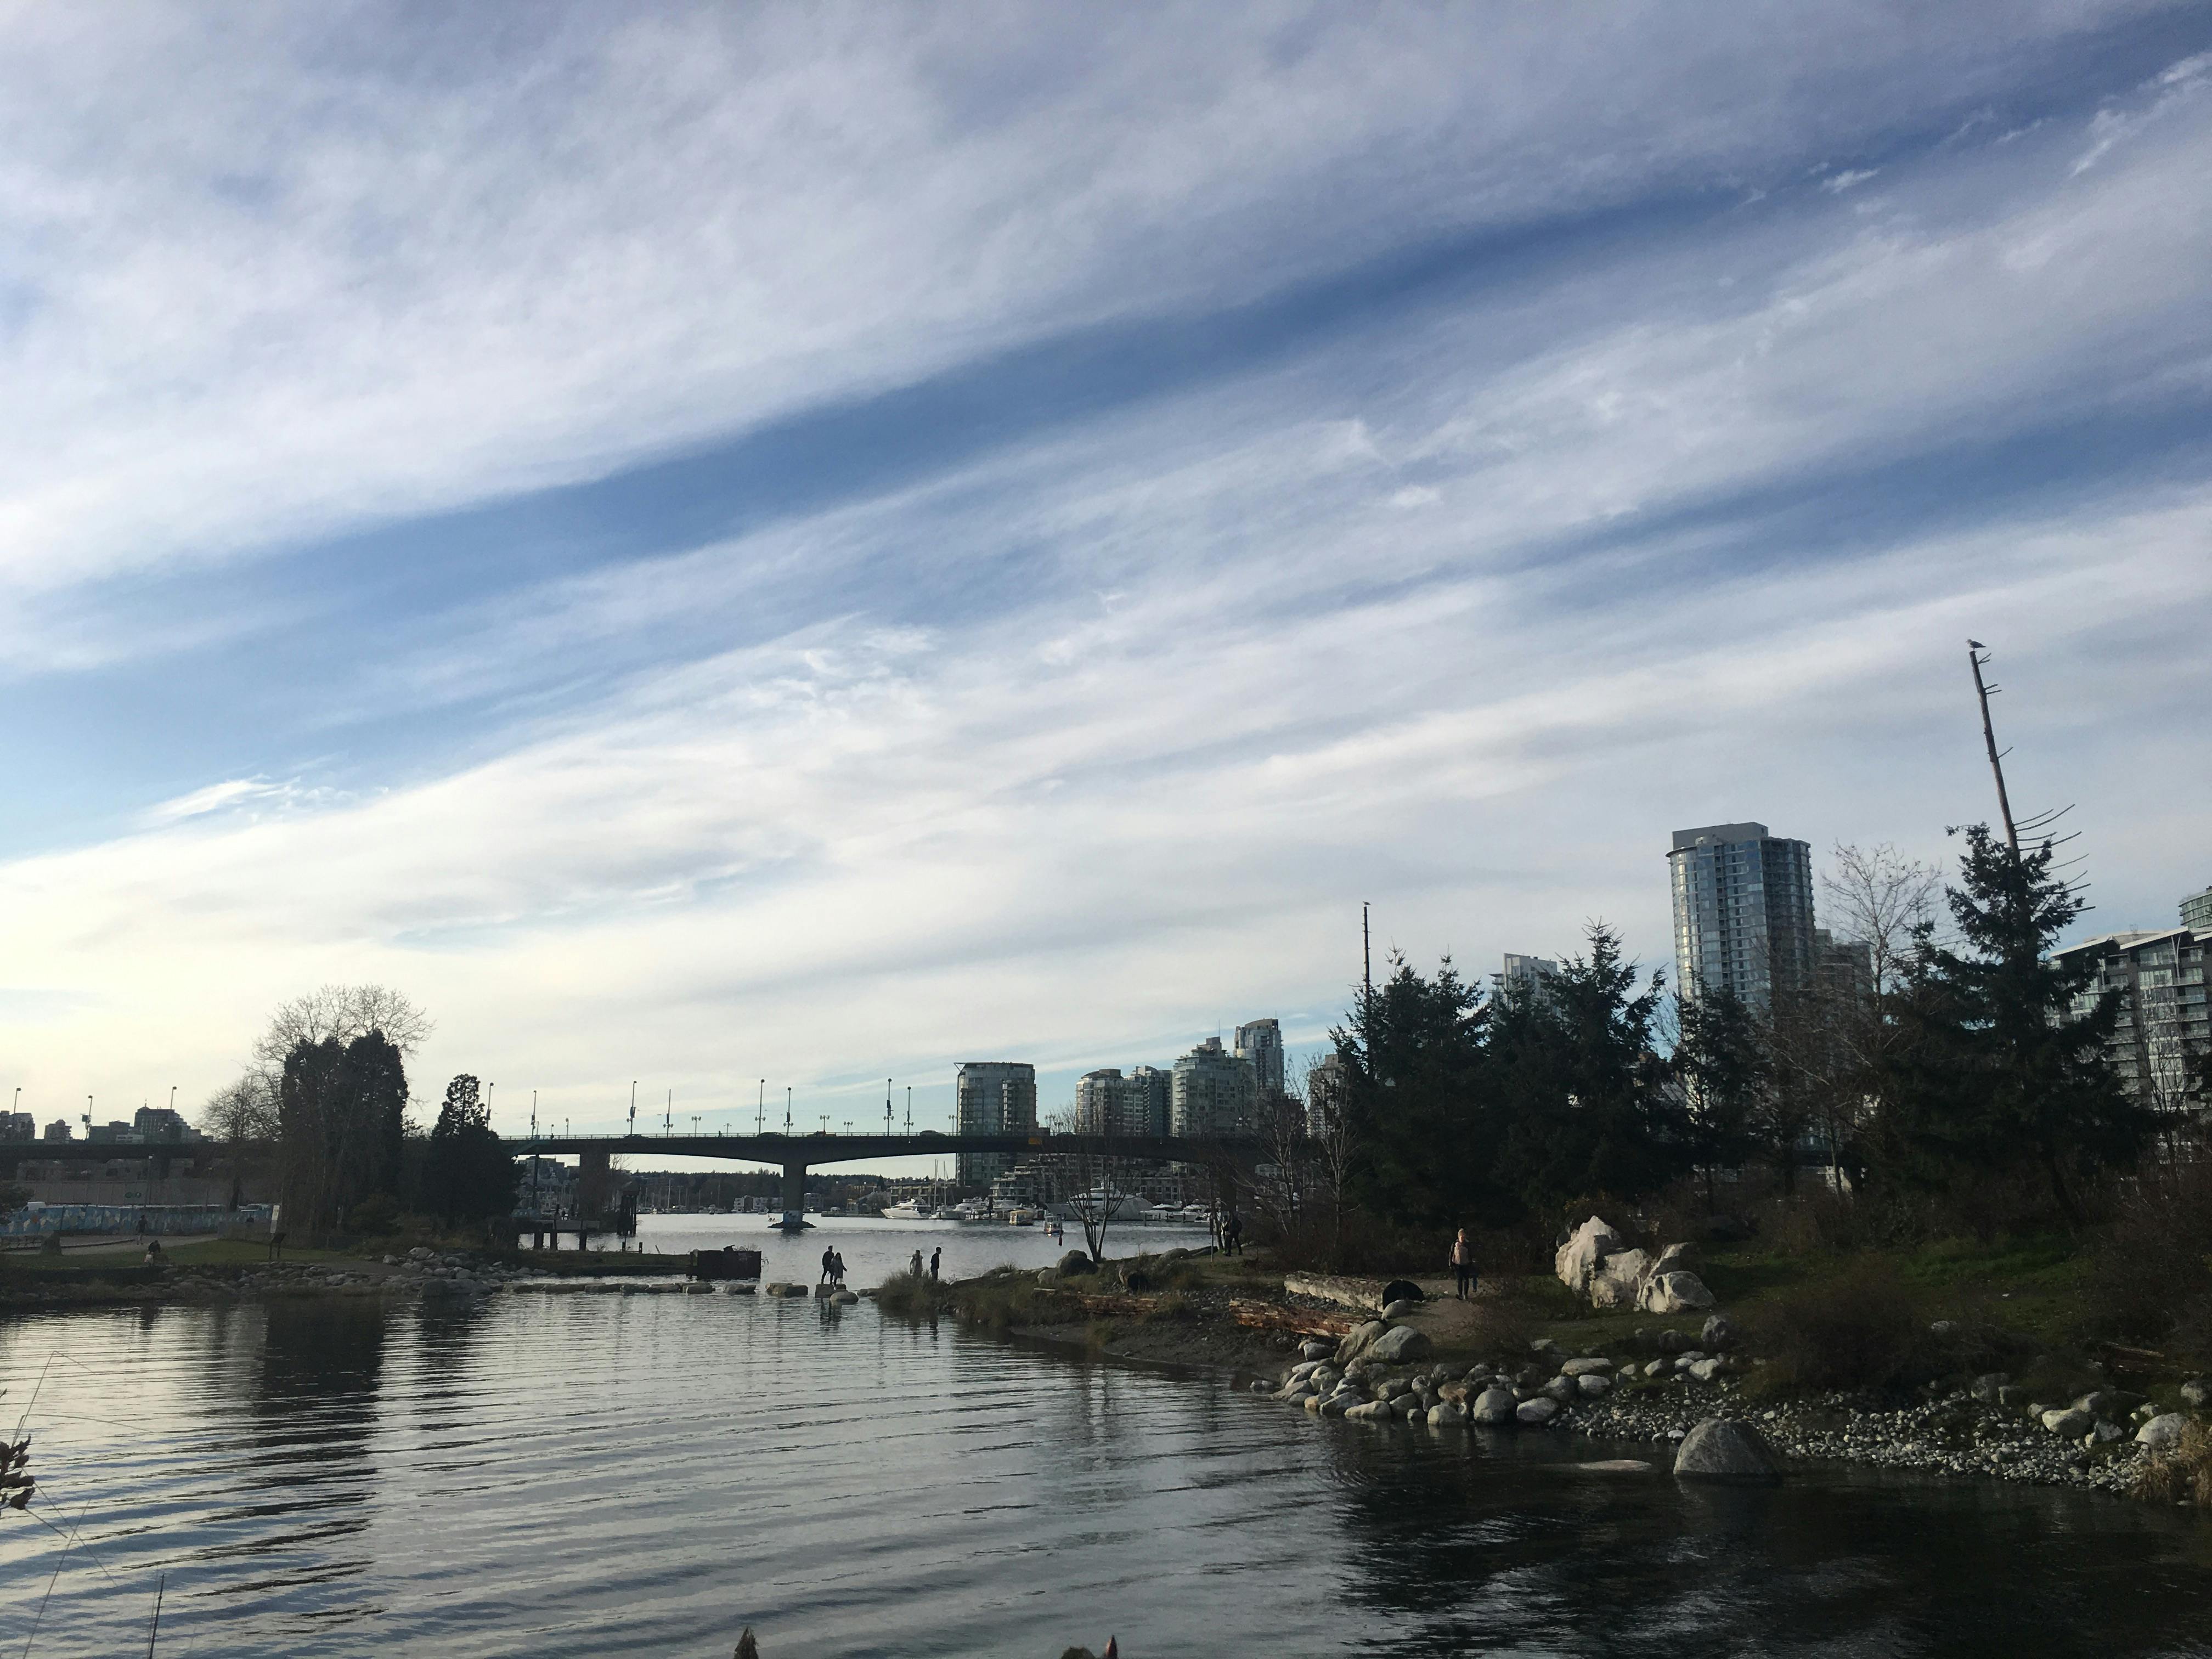 2018 king tide almost floods the stone path to Habitat Island